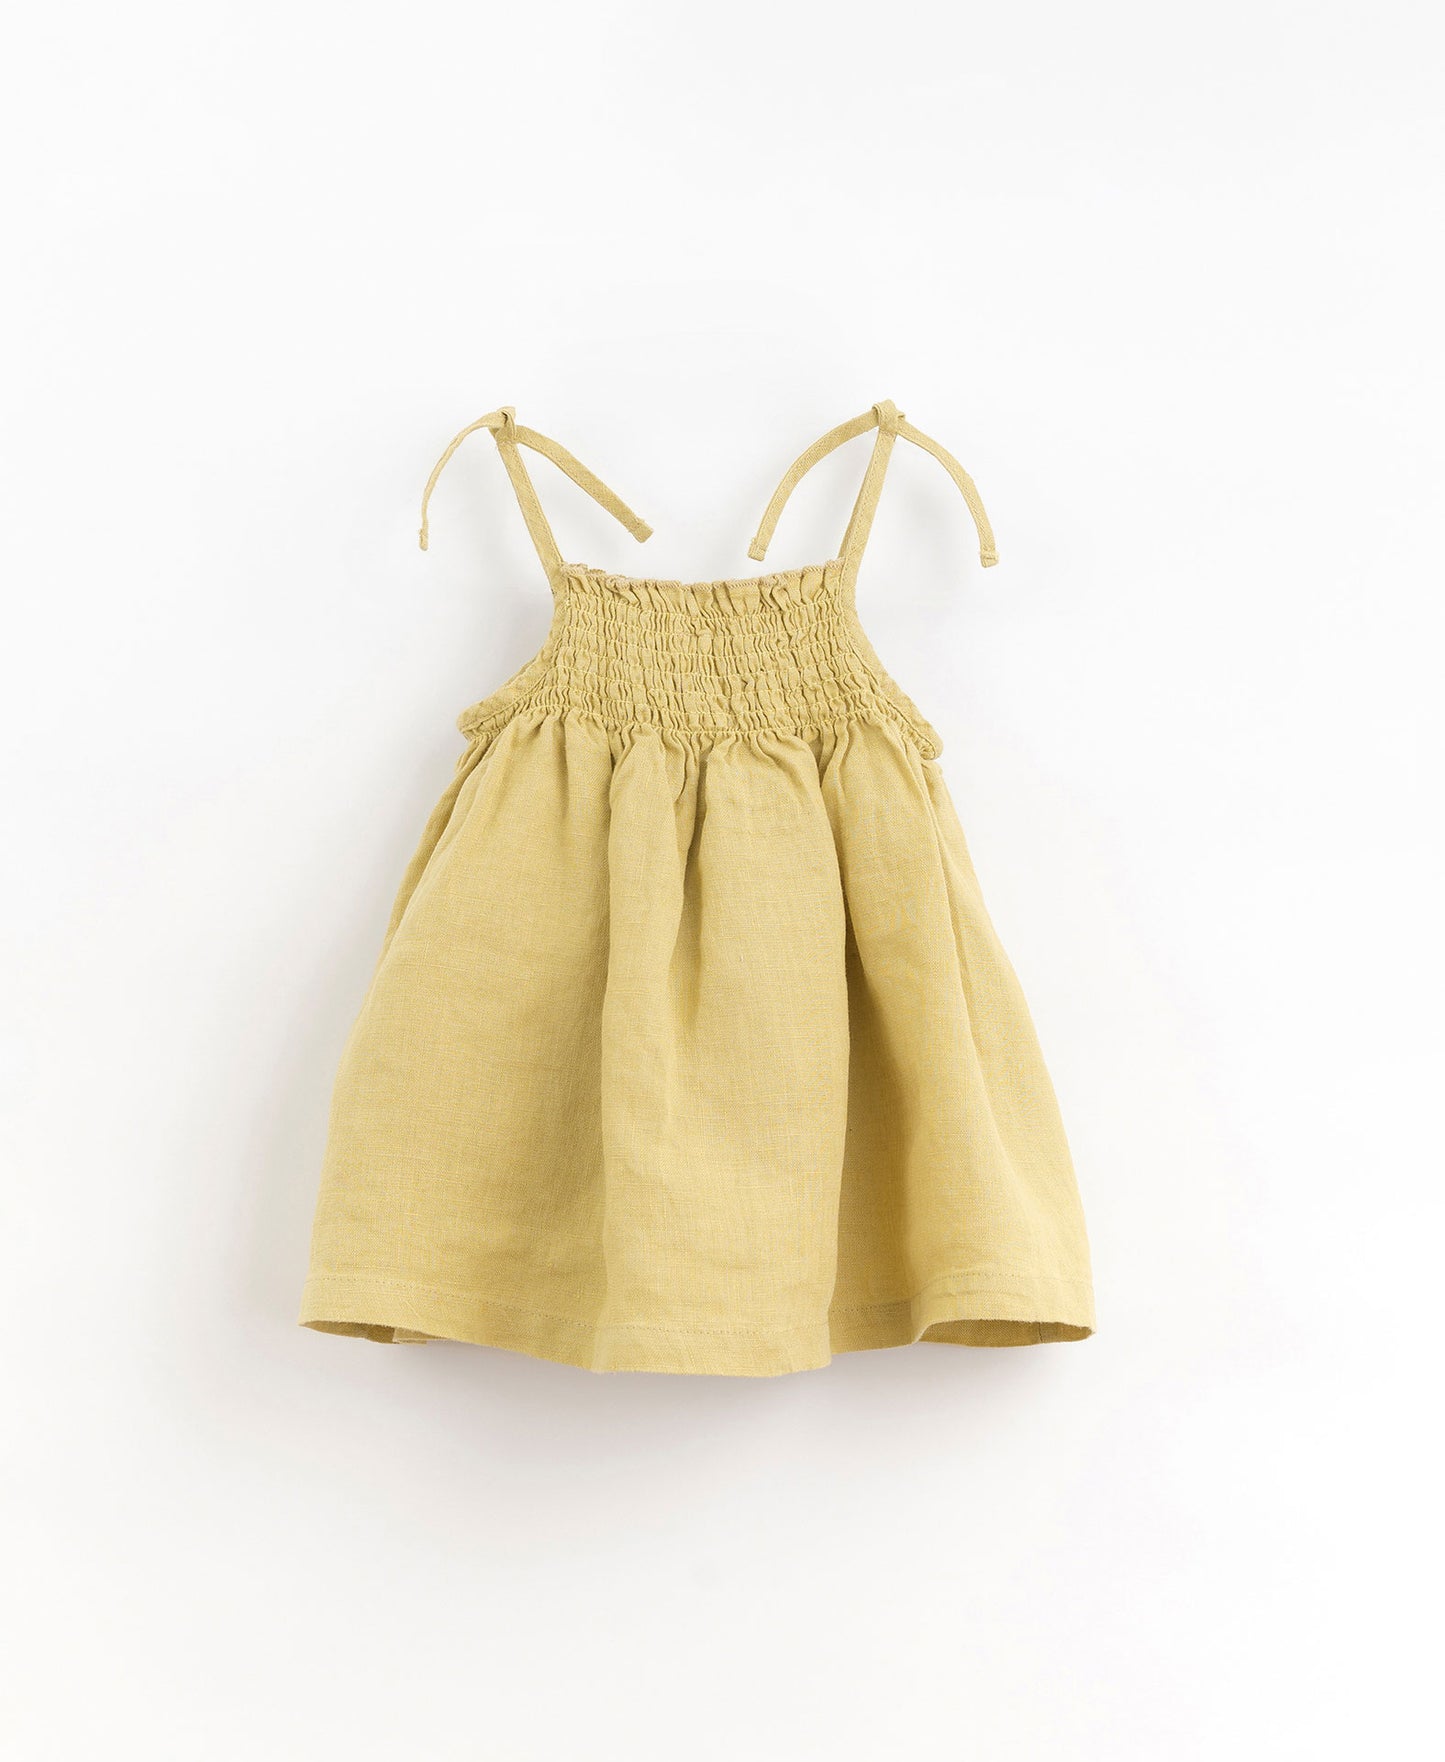 Linen dress with bows on the straps - lime